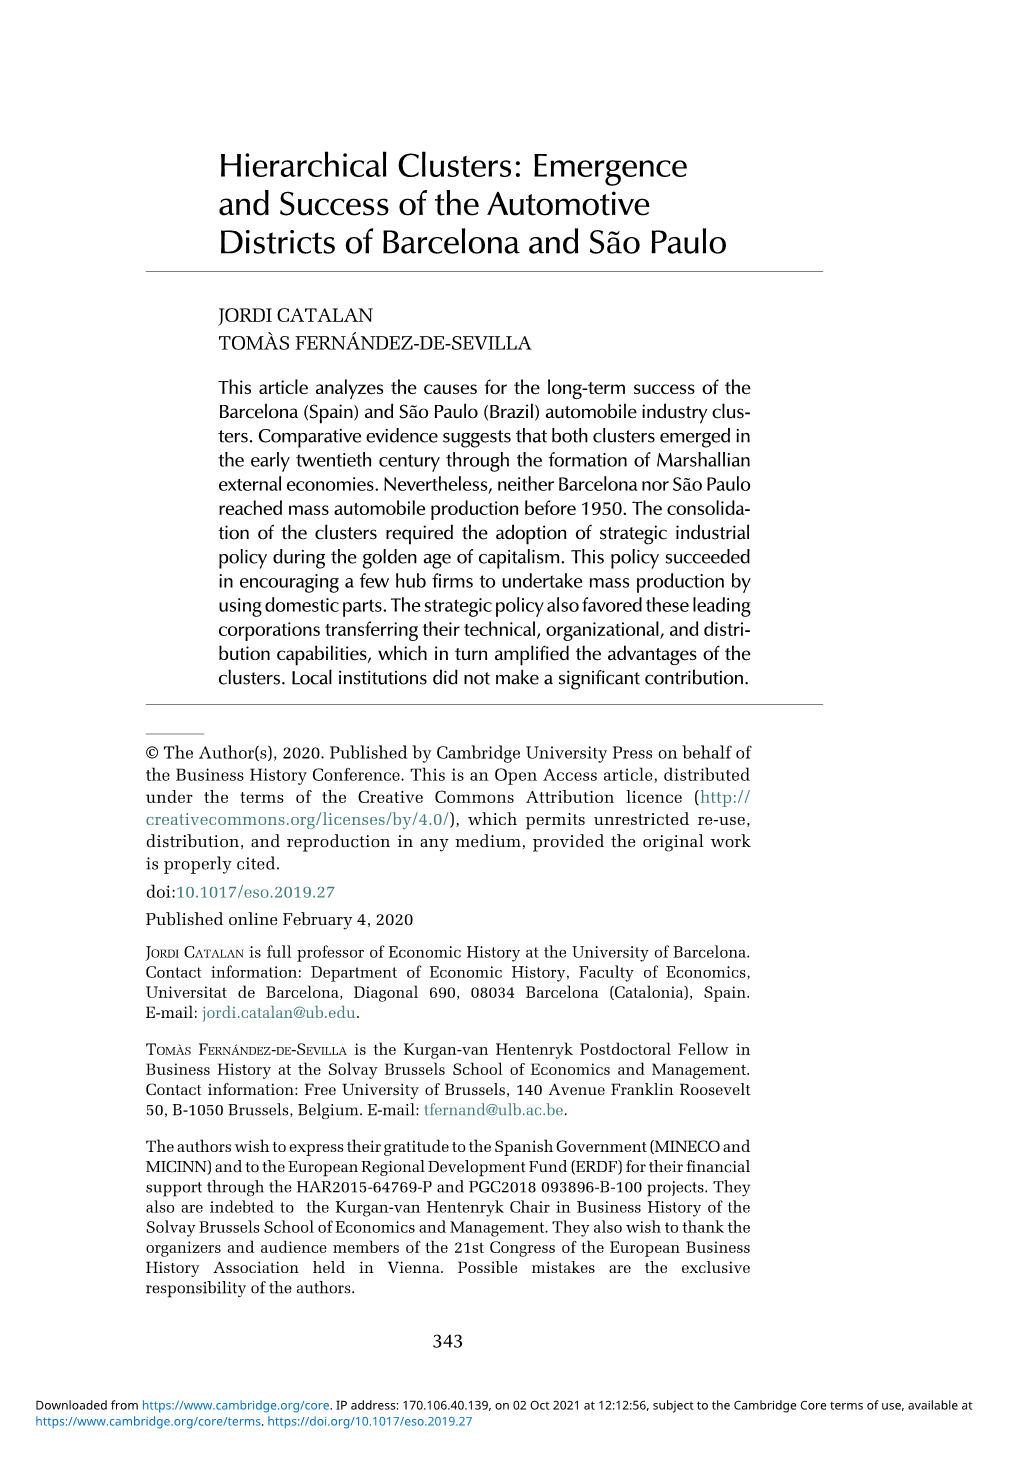 Hierarchical Clusters: Emergence and Success of the Automotive Districts of Barcelona and São Paulo